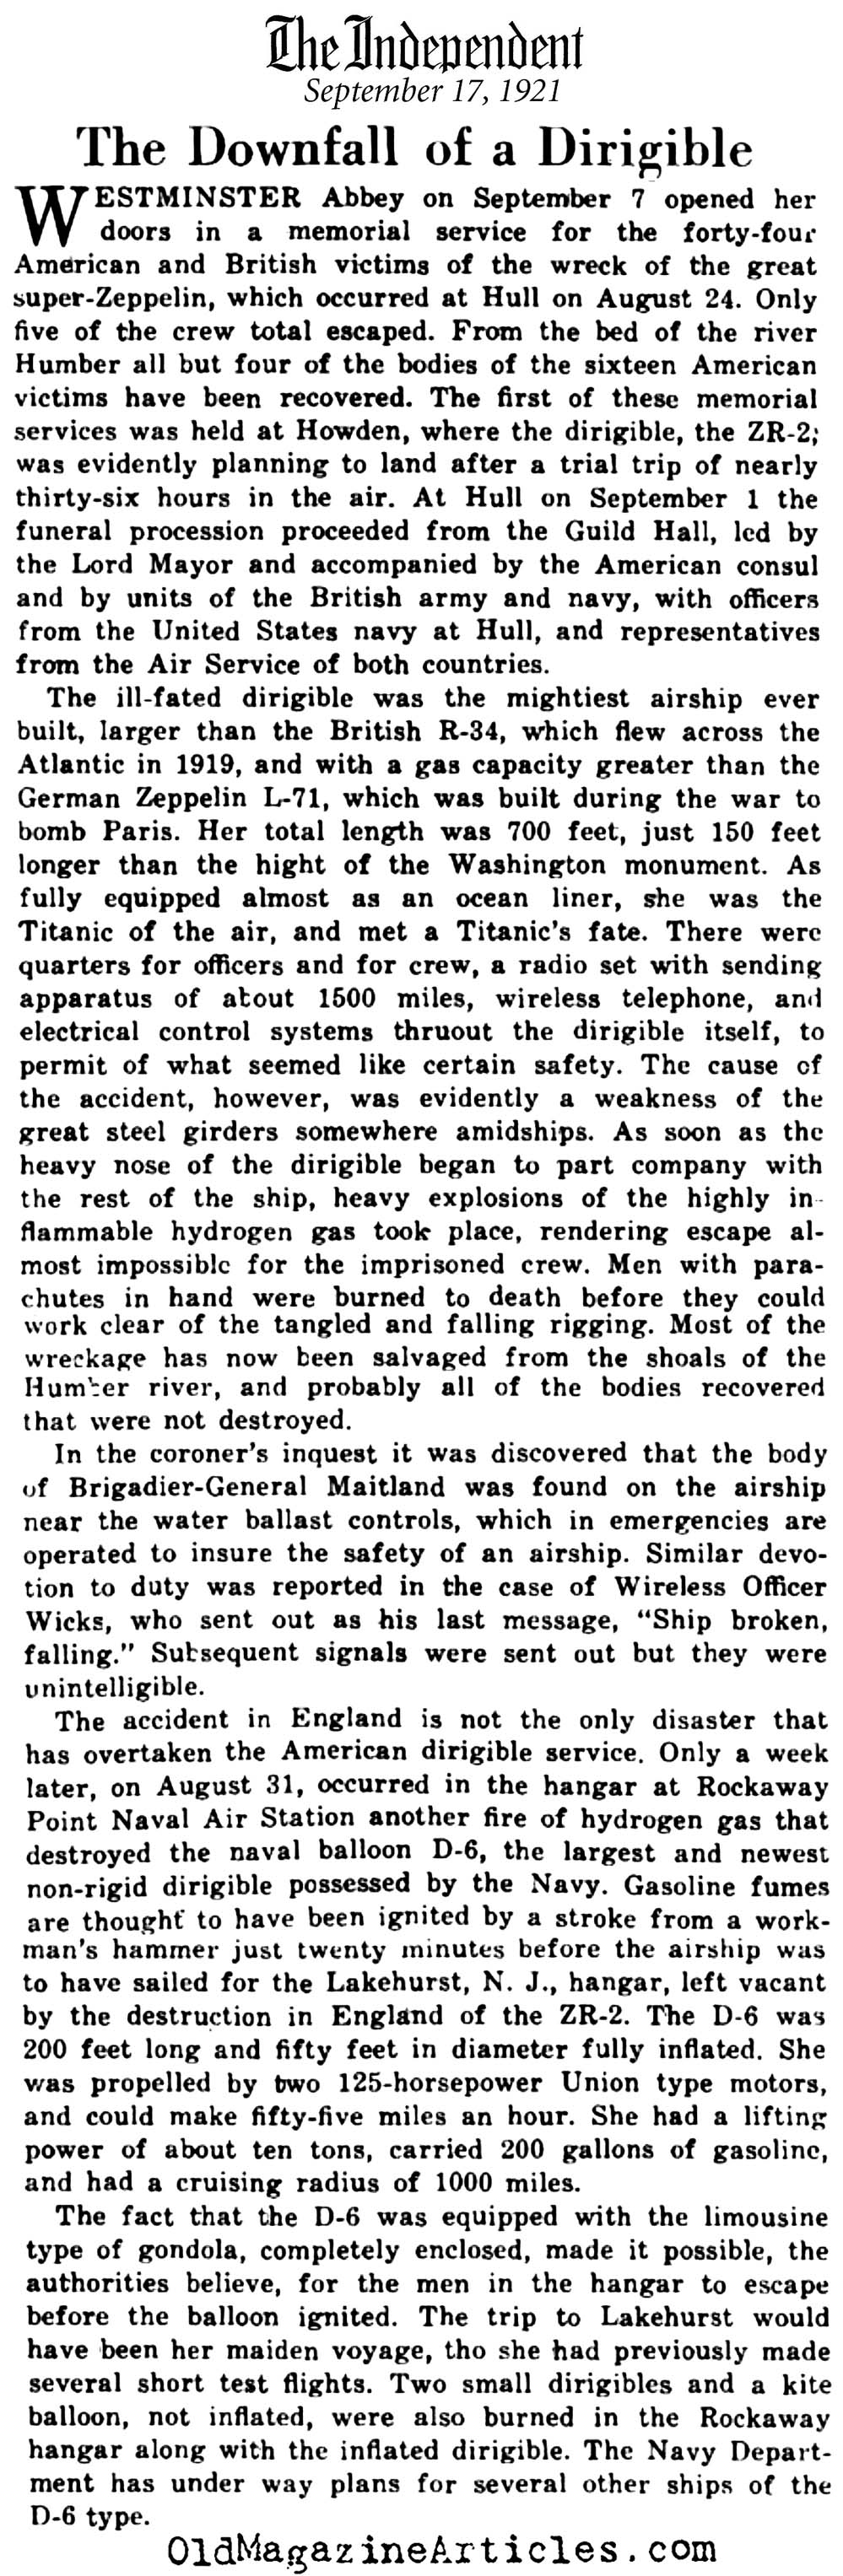 The Downfall of a Dirigible  (The Independent, 1921)